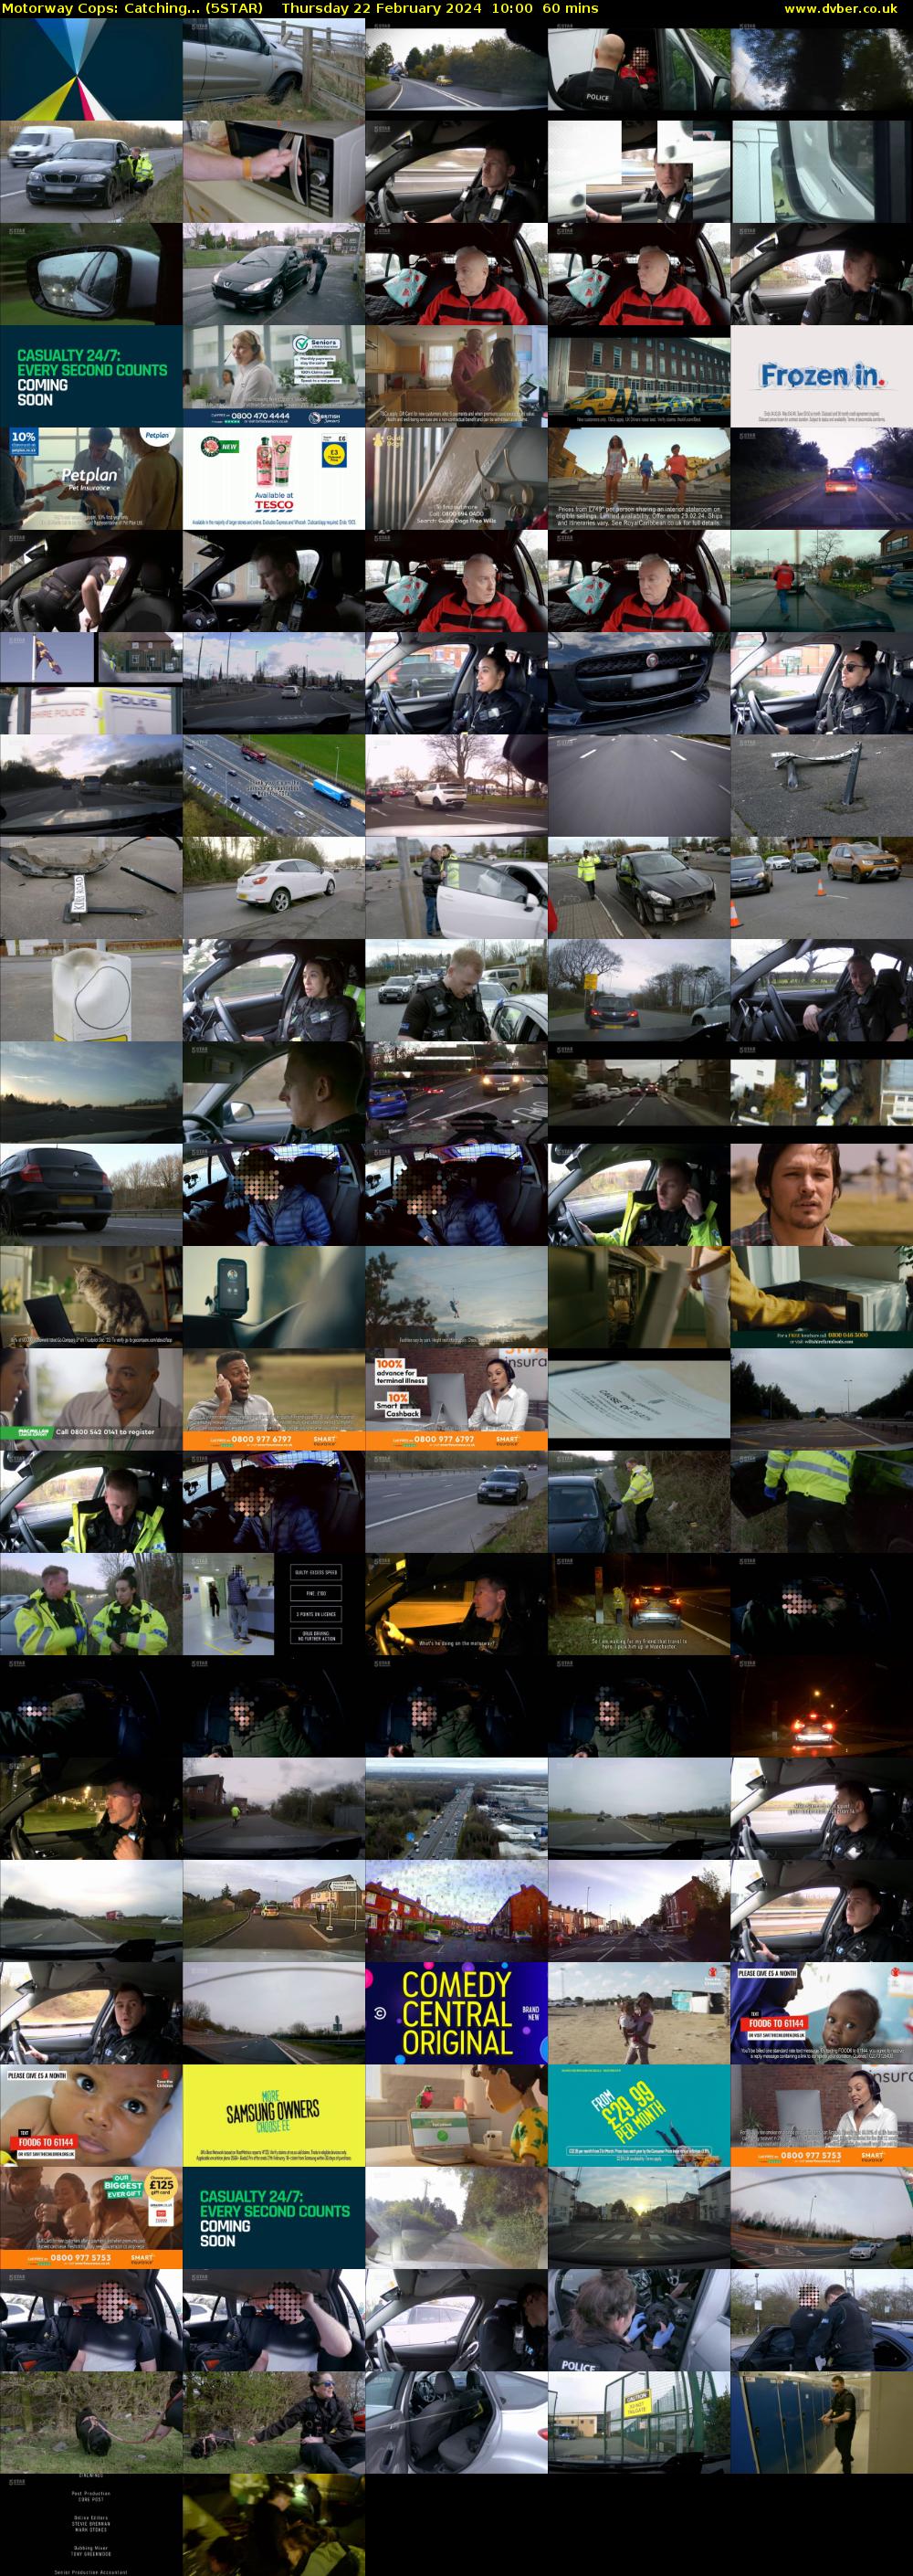 Motorway Cops: Catching... (5STAR) Thursday 22 February 2024 10:00 - 11:00